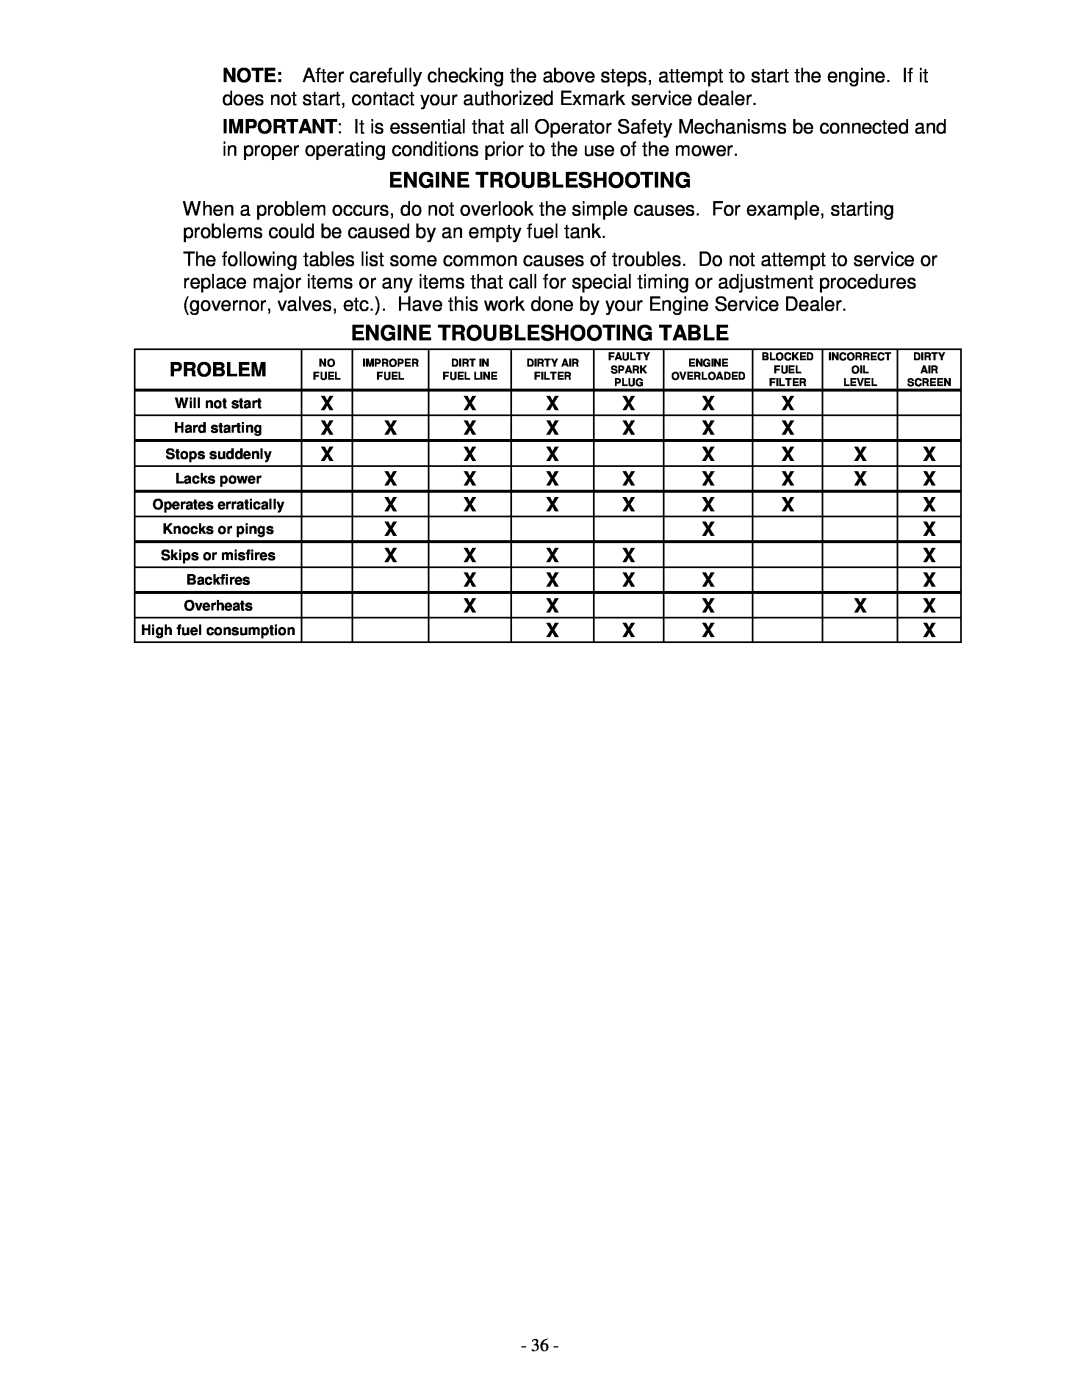 Exmark TR23KC manual Engine Troubleshooting Table, Problem 